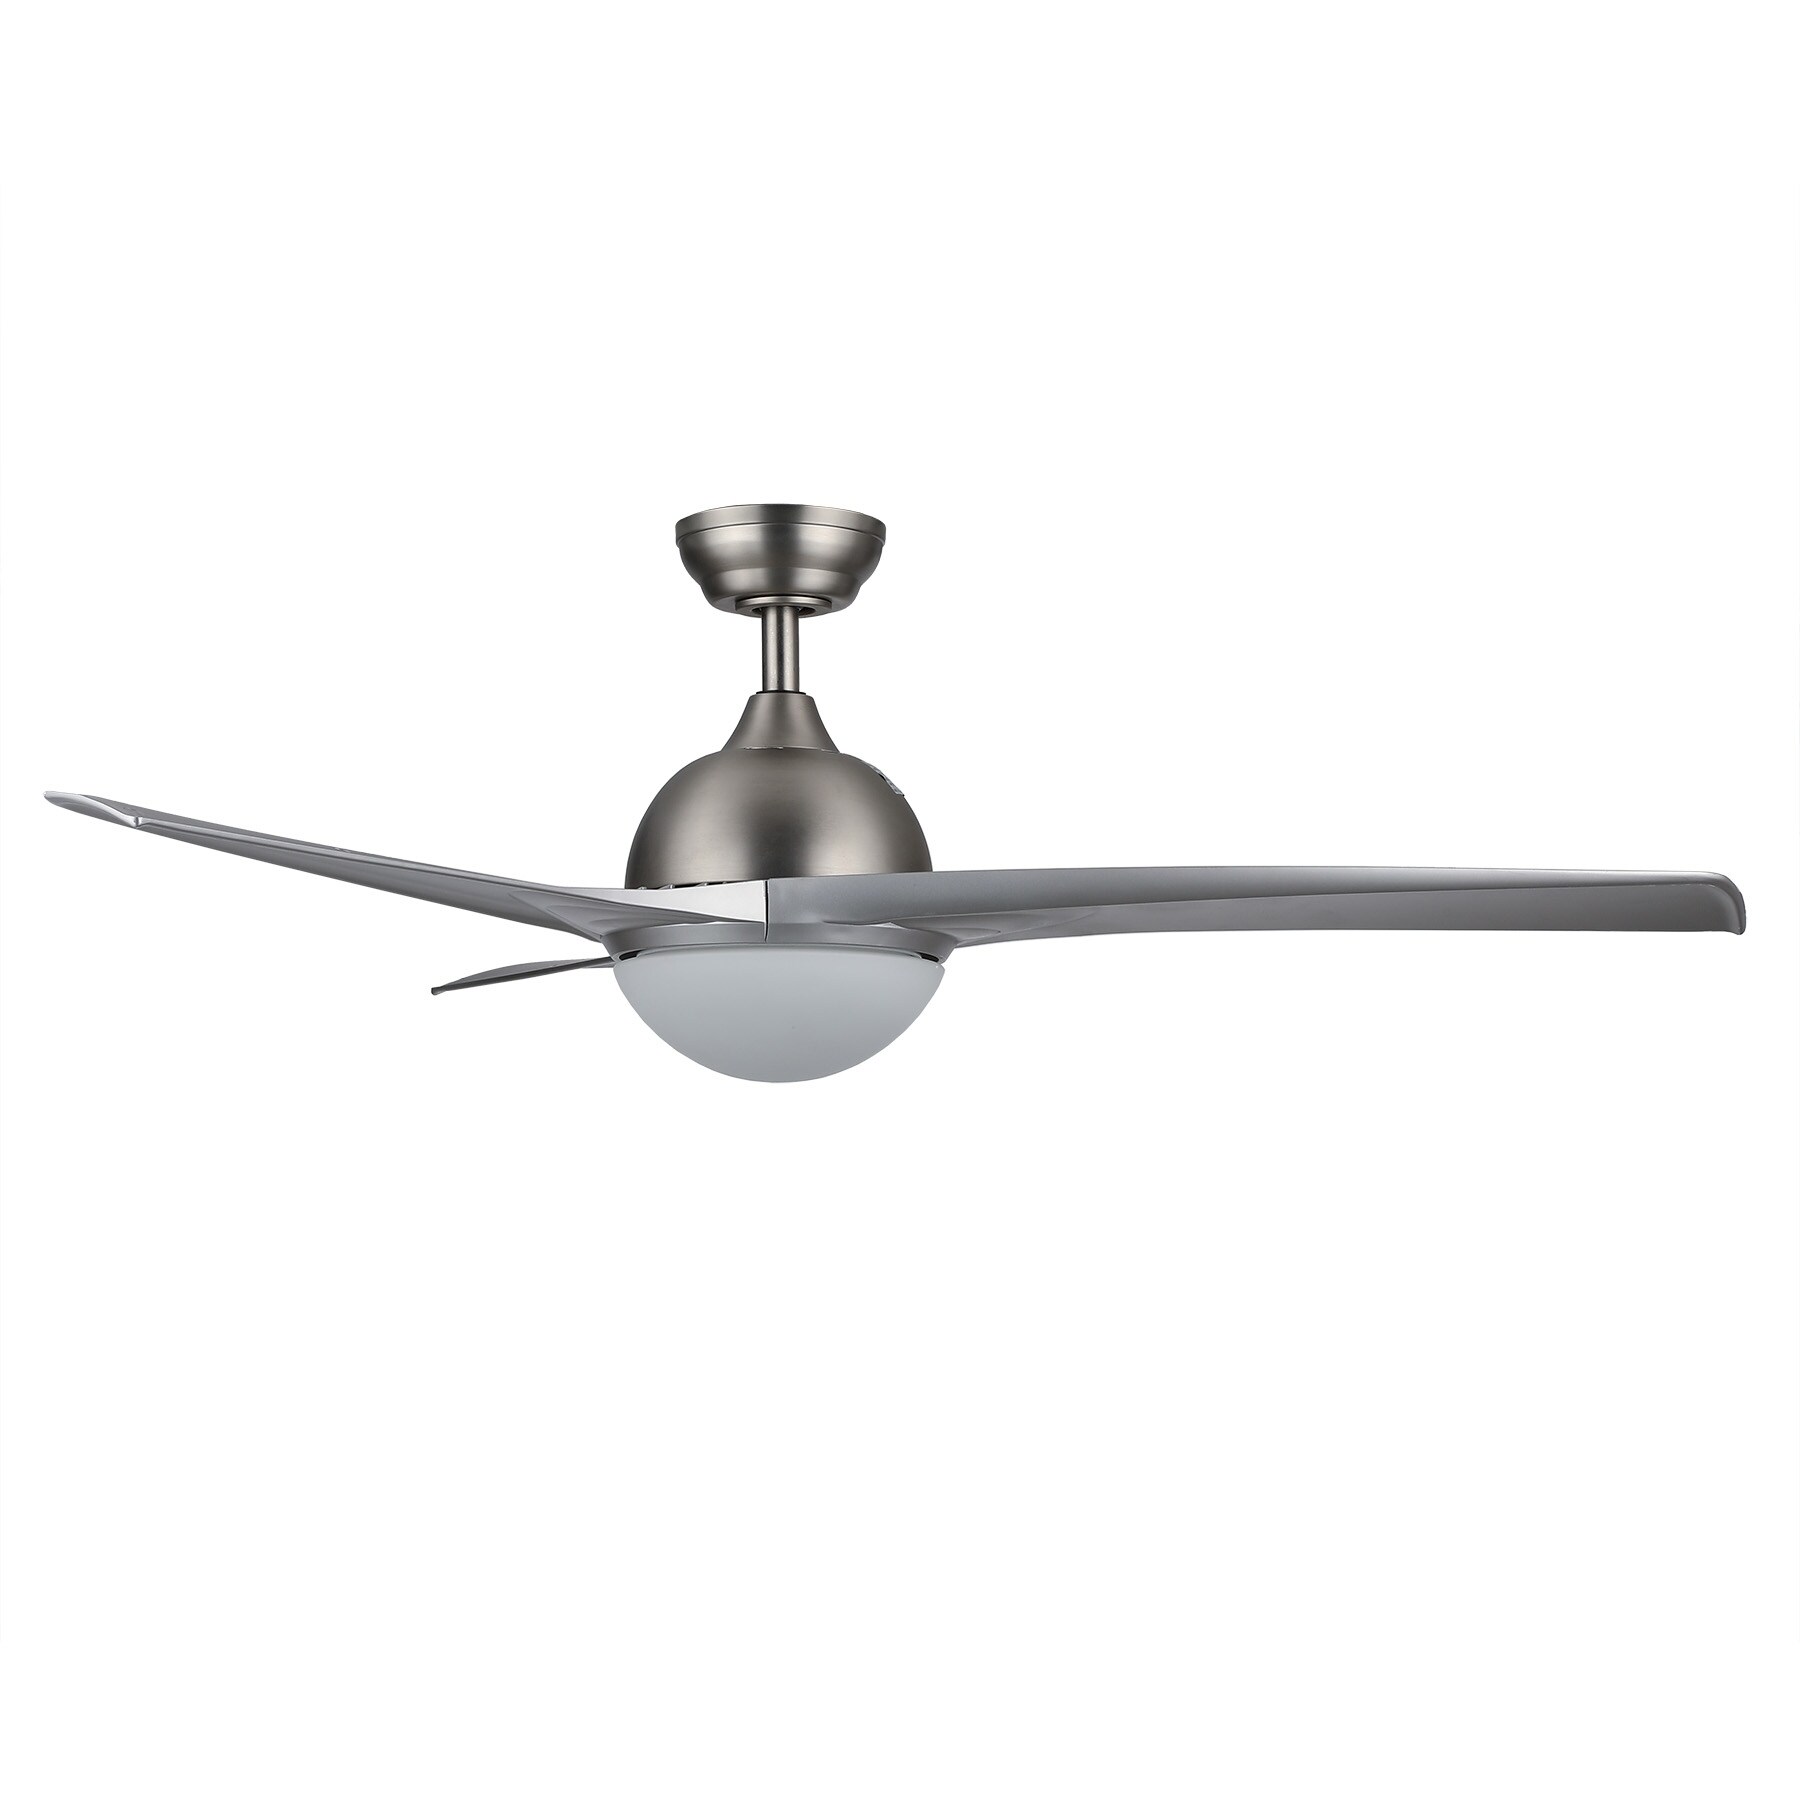 Ceiling Fans Modern Ceiling Fan With Light 52 Inch Ceiling